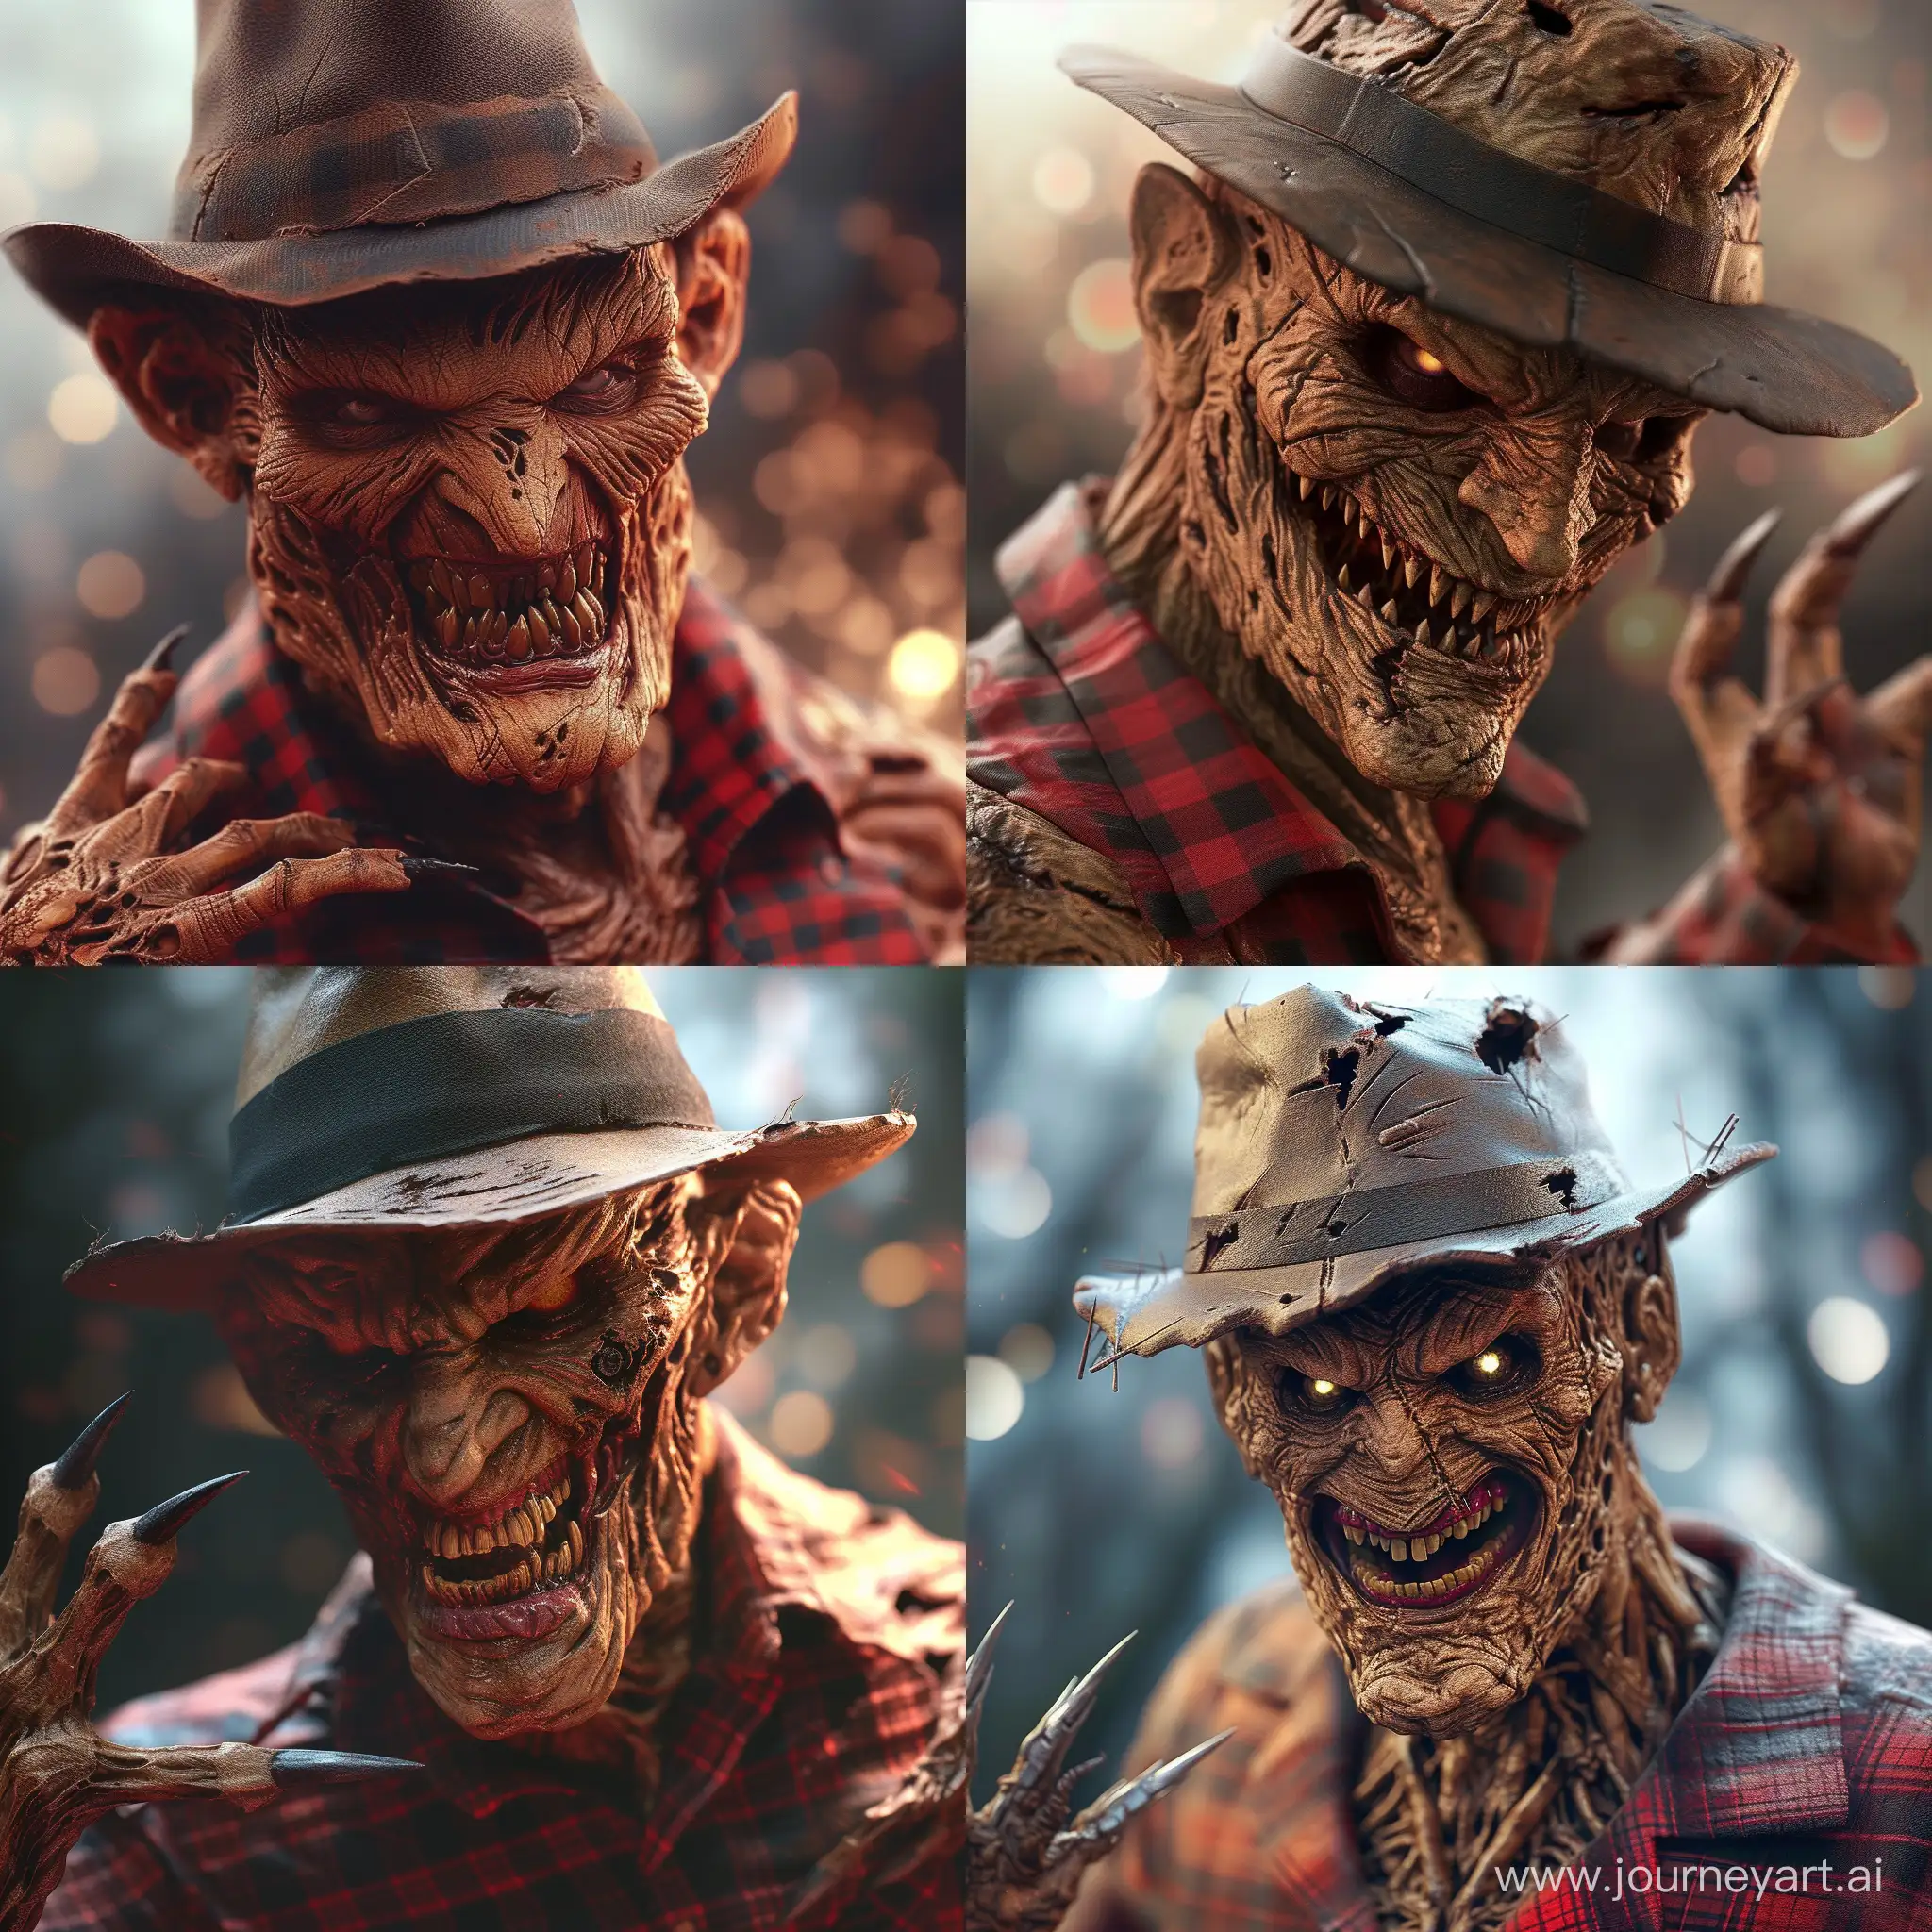 realistic freddy krueger a very detailed and gruesome appearance reminiscent of a monster or demonic figure.

Notable features include:

Face: The face has a leathery, wrinkled texture with a prominent, unsettling grin full of sharp teeth. The eyes are deeply set with a menacing glow, and the overall expression is one of malevolence.

Headwear: The character is wearing a hat, which looks worn and tattered, contributing to the overall eerie and possibly ancient vibe of the character.

Attire: Partially visible is what seems to be a red, plaid pattern on the character's clothing, though it is difficult to discern much about the attire due to the close-up nature of the image.

Skin Texture and Color: The skin is a dark, mottled brown, giving the impression of either a rough, bark-like surface or decayed flesh.

Pose and Gestures: The character's pose is aggressive or defensive, with what appears to be clawed hands raised and possibly coming towards the viewer.

Backdrop: The background is blurred with hints of light, possibly suggesting motion or a chaotic environment, which adds to the intense and potentially dangerous aura of the character.

Overall, the image is highly detailed, conveying a sense of horror and fantasy, and would not be out of place as a character in a dark-themed video game, movie, or illustration for a book. --v 6